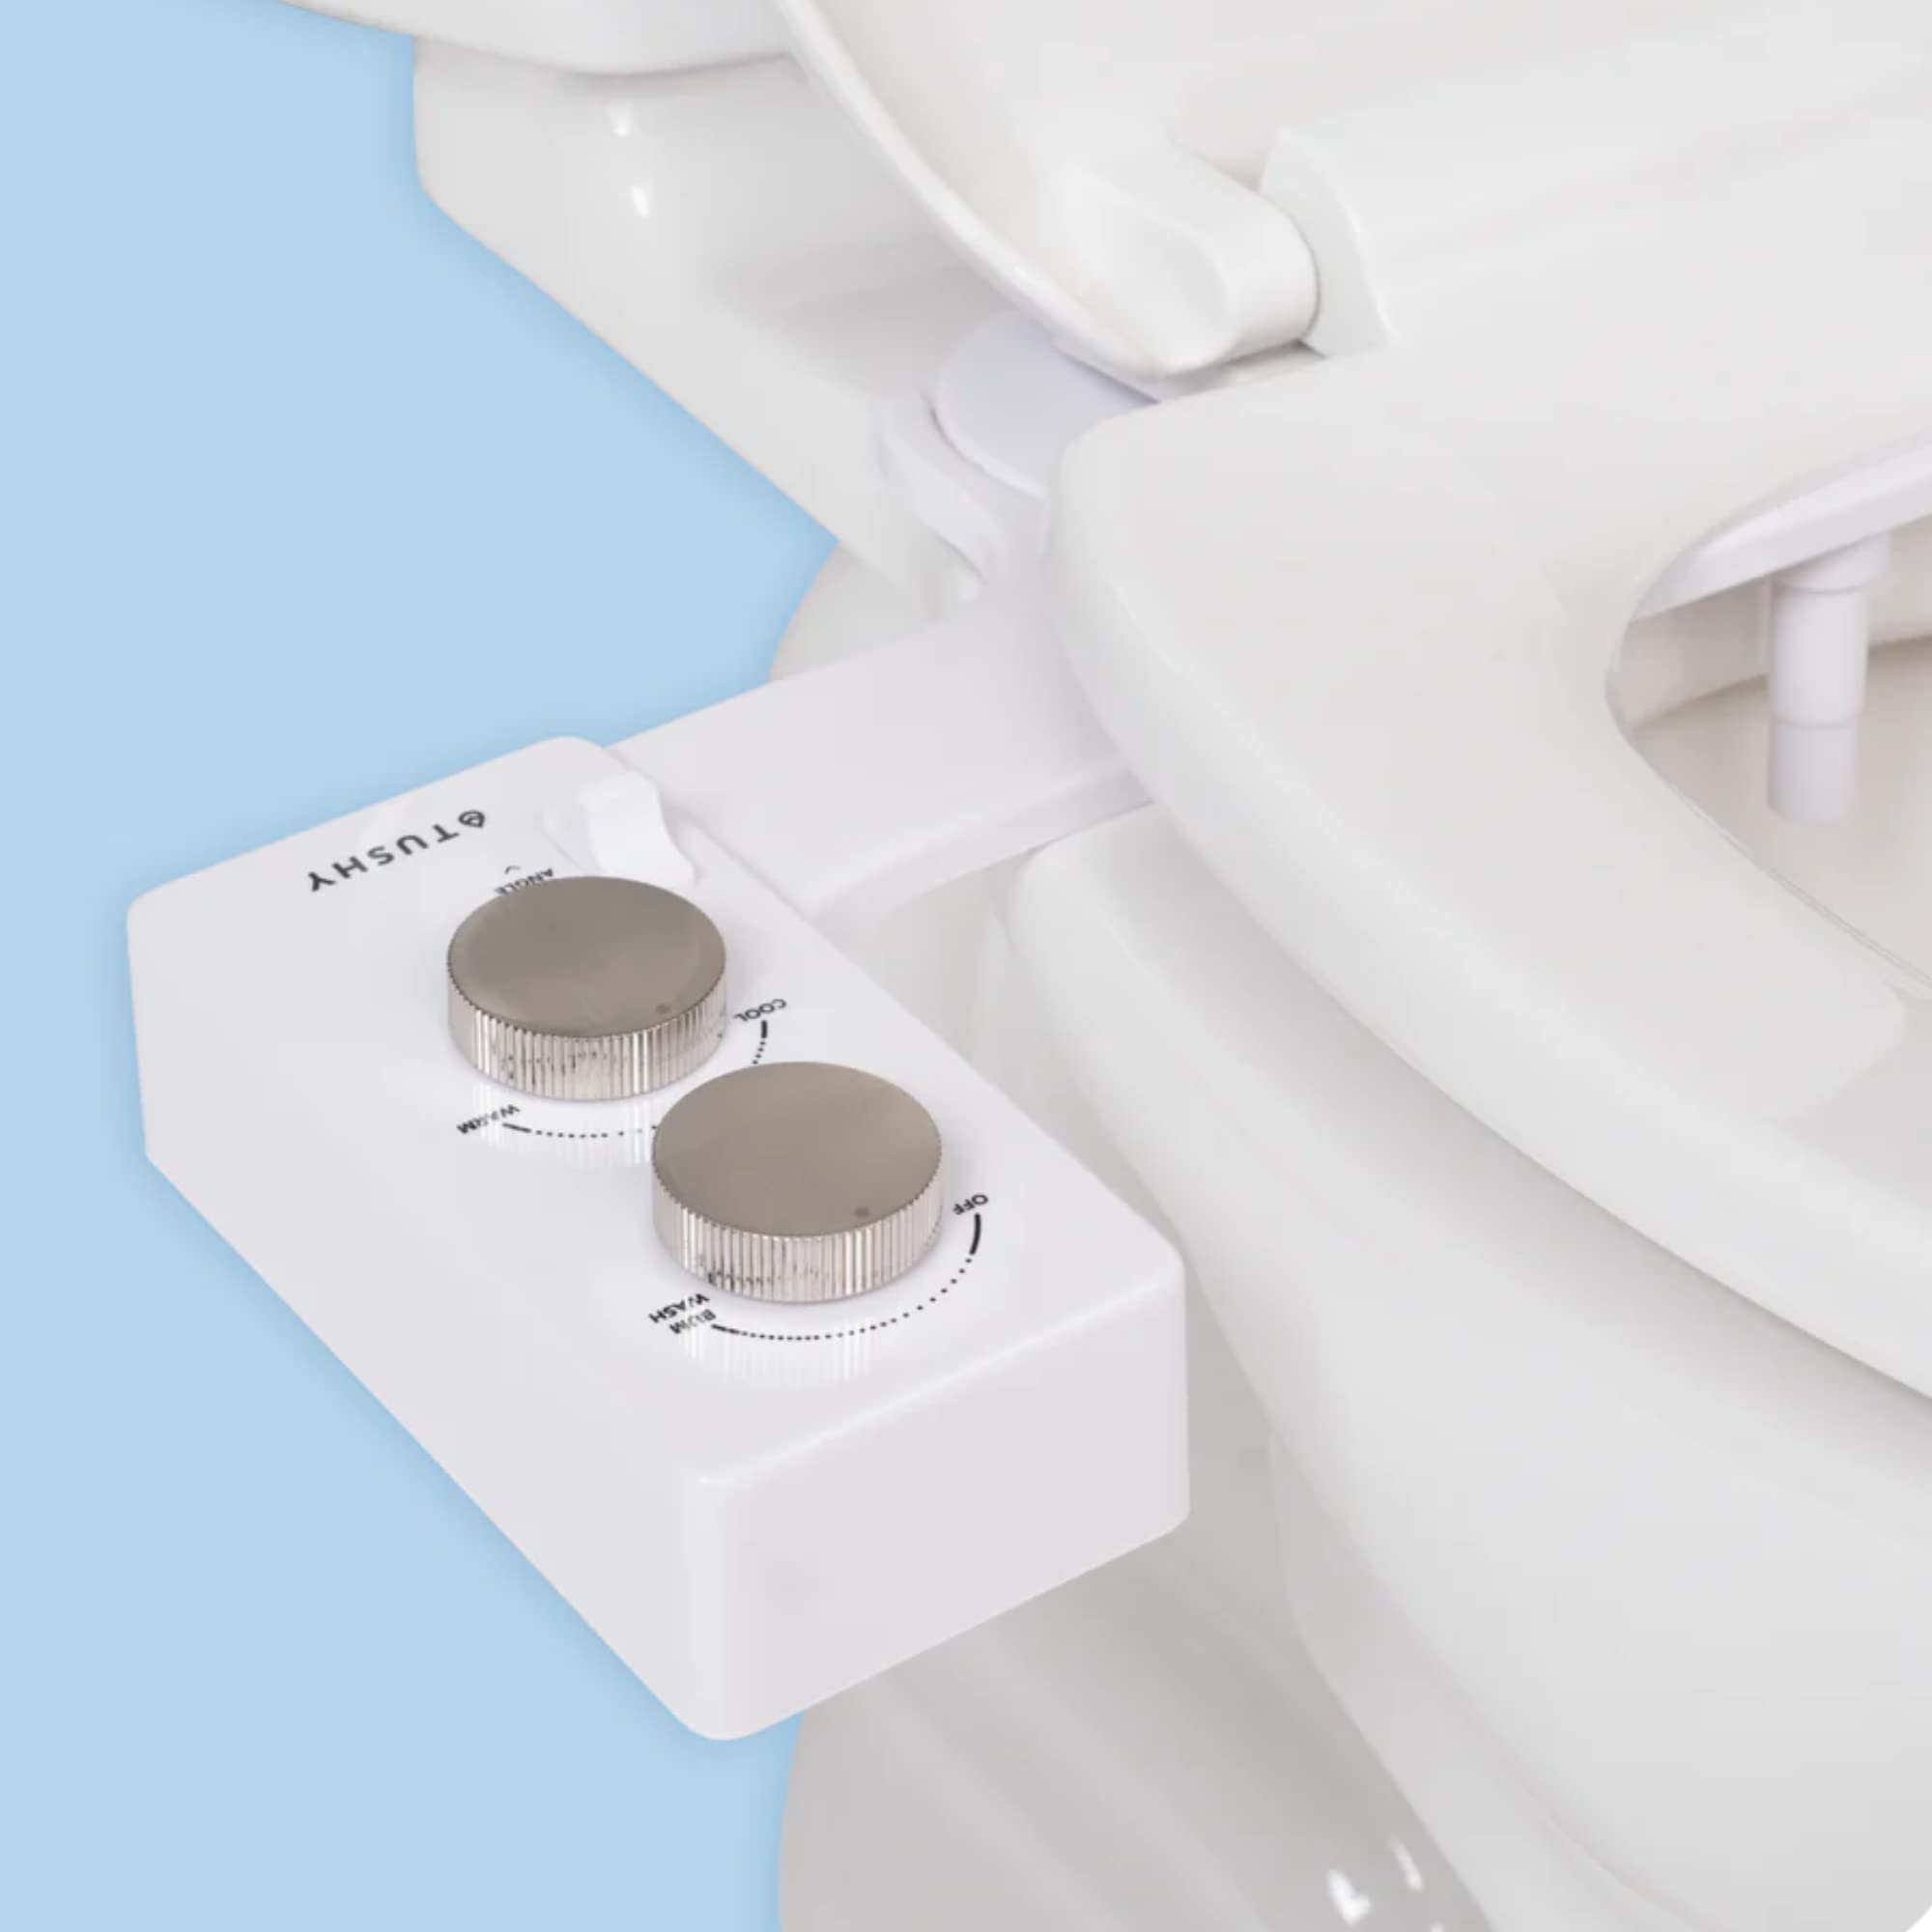 Tushy Warm Water Spa Bidet Attachment | Self Cleaning Fresh Water Sprayer +Adjustable Pressure Nozzle, Angle Control, (Adjustable Cool to Warm Water Temperature Option), Platinum Knobs